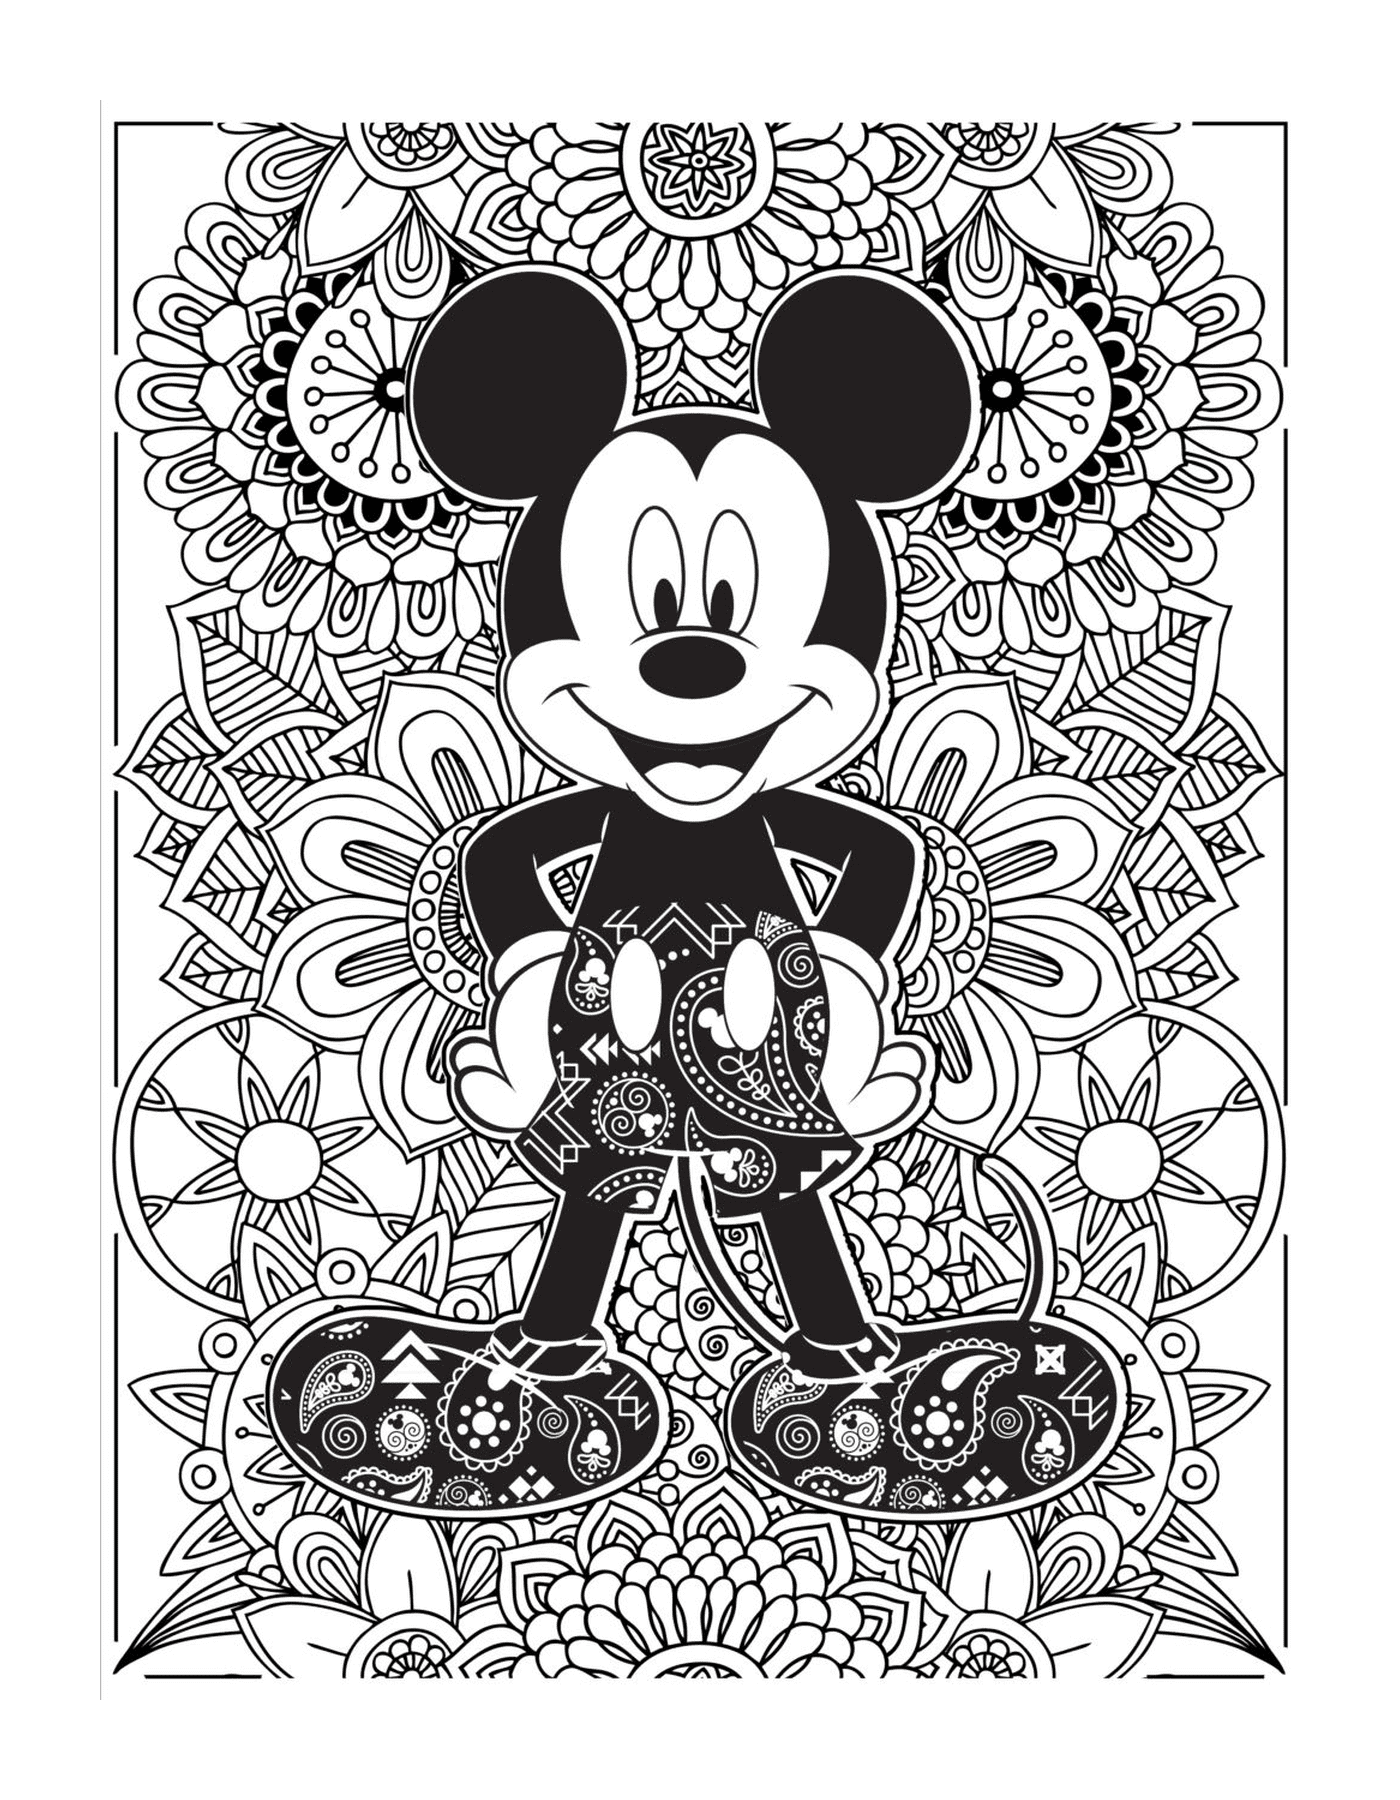  Mickey Mouse in a mandala 